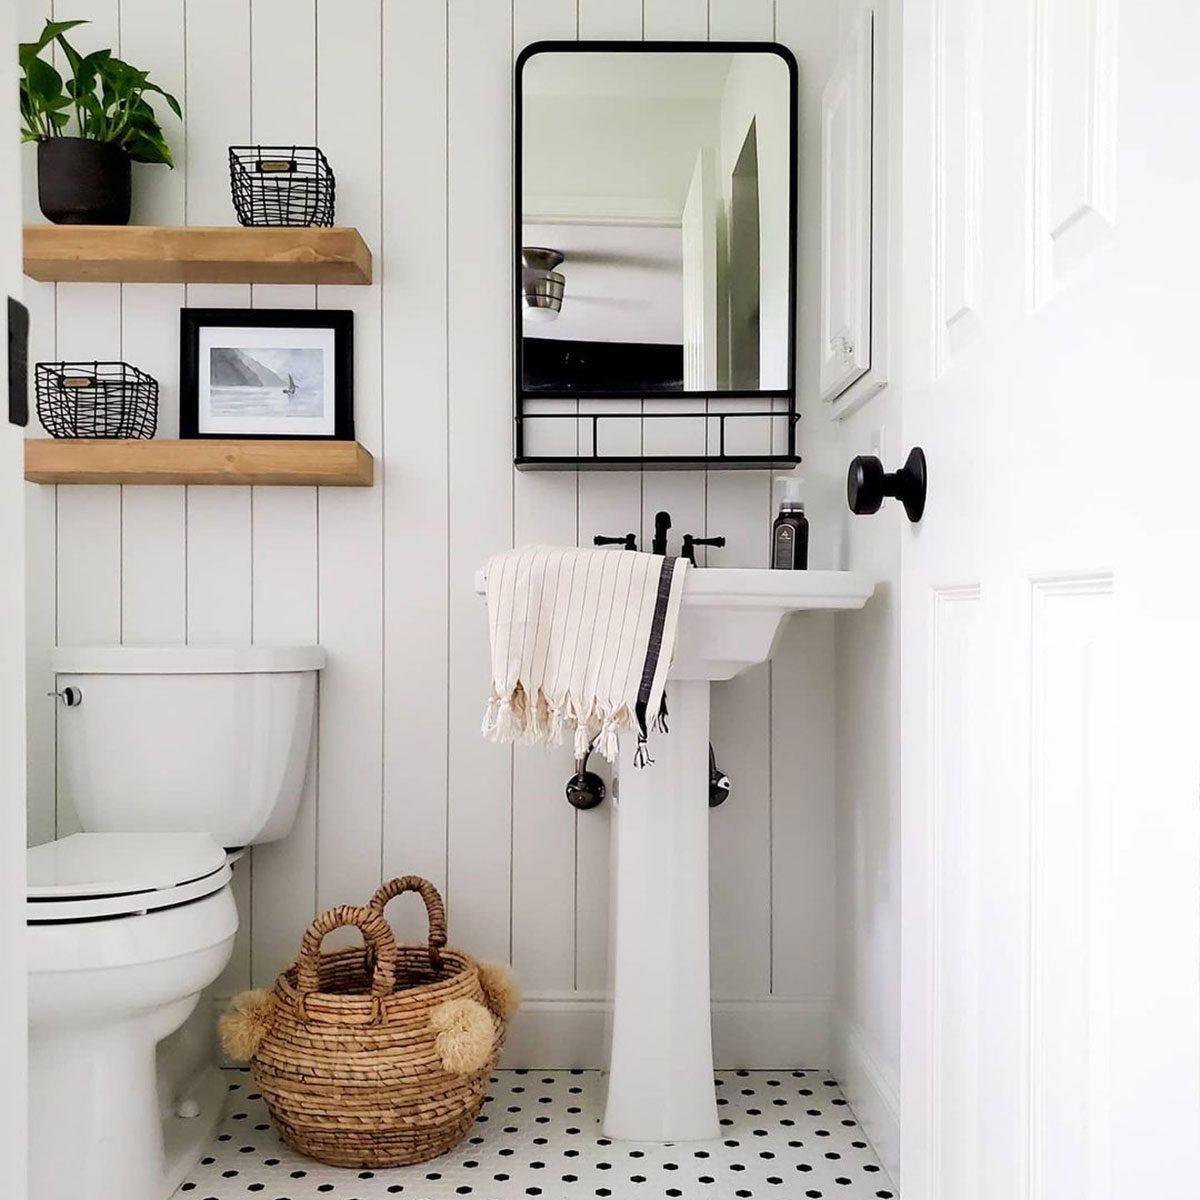 10 Decorative Designs For Your Small Bathroom